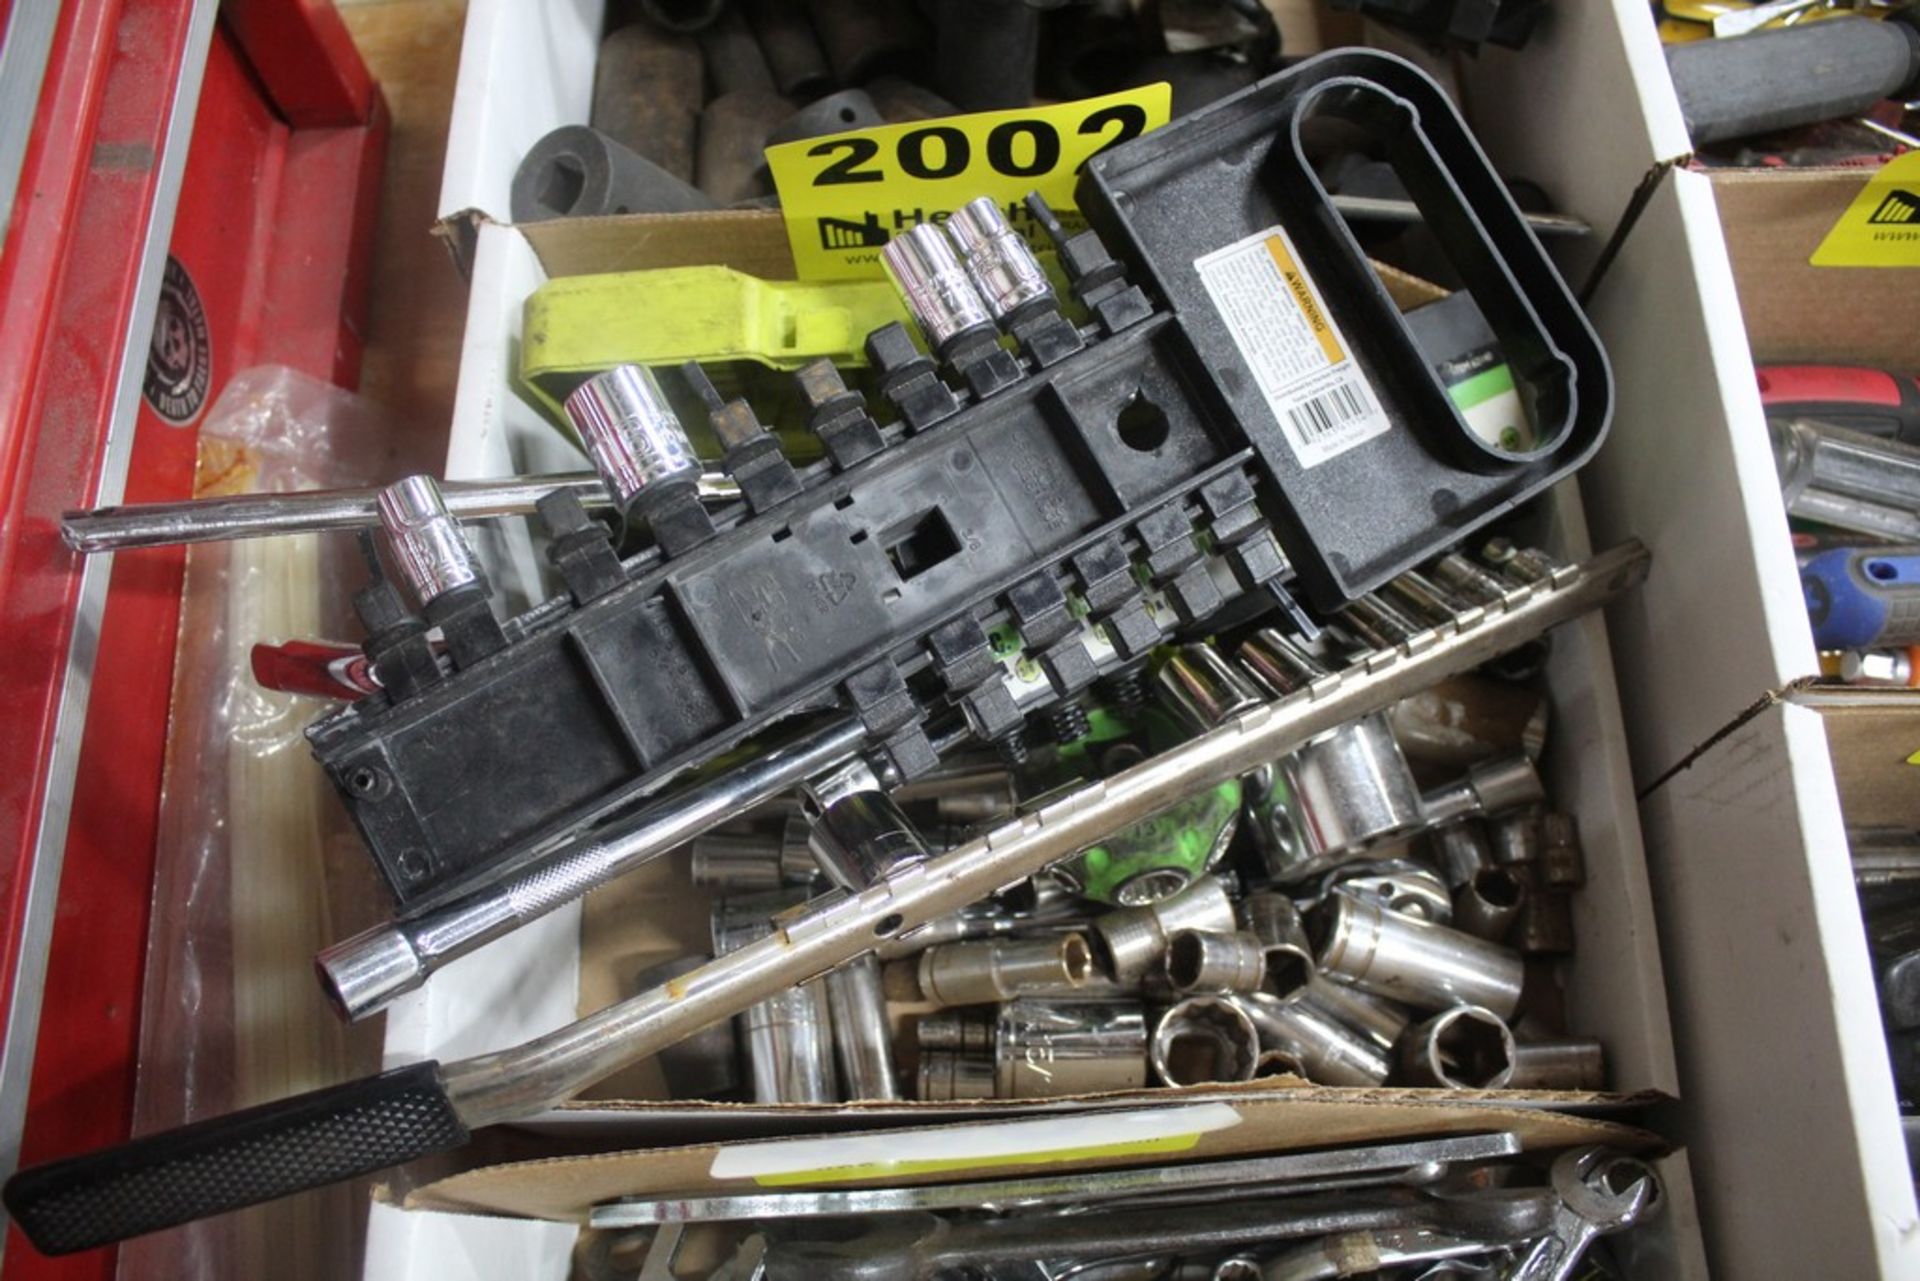 LARGE ASSORTMENT OF SOCKETS AND RATCHET ACCESSORIES IN BOX